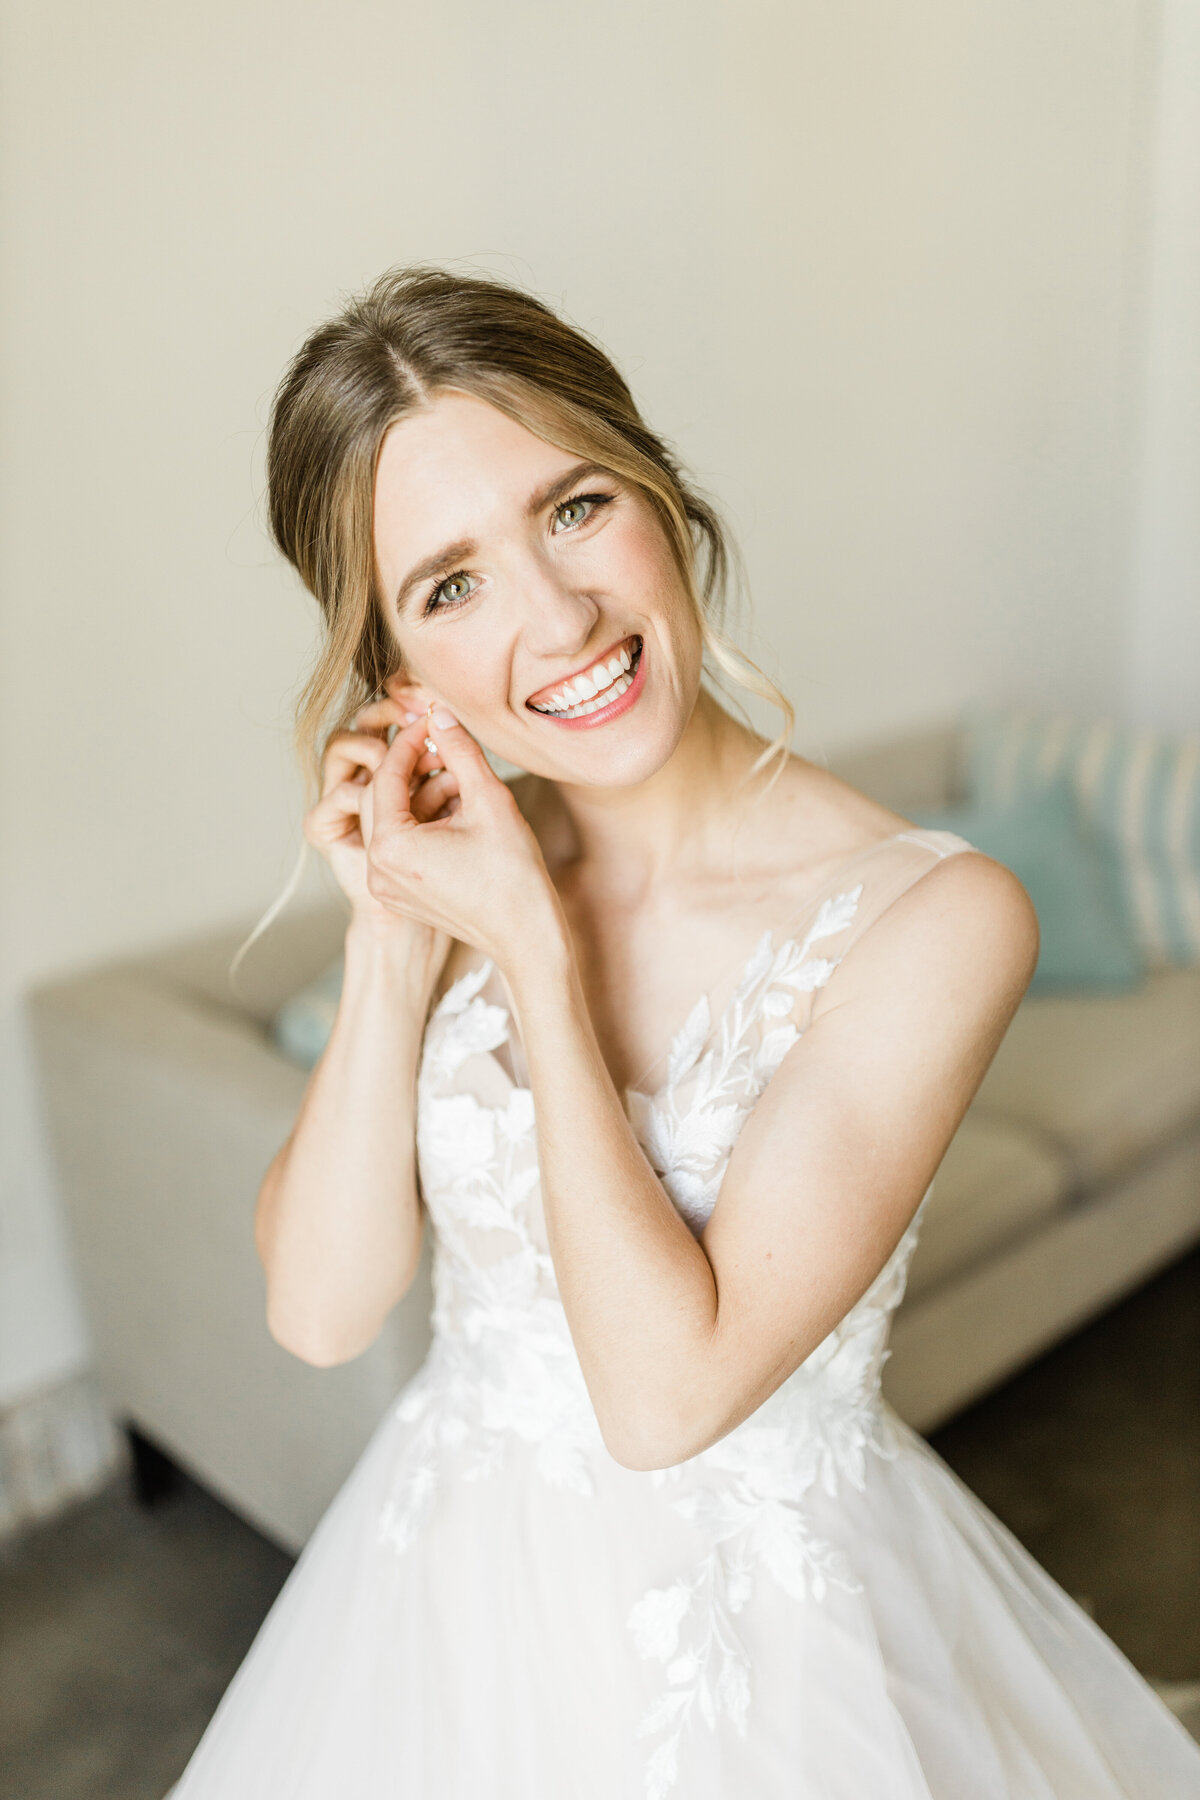 This bride and her perfect smile belong on the cover of a magazine!